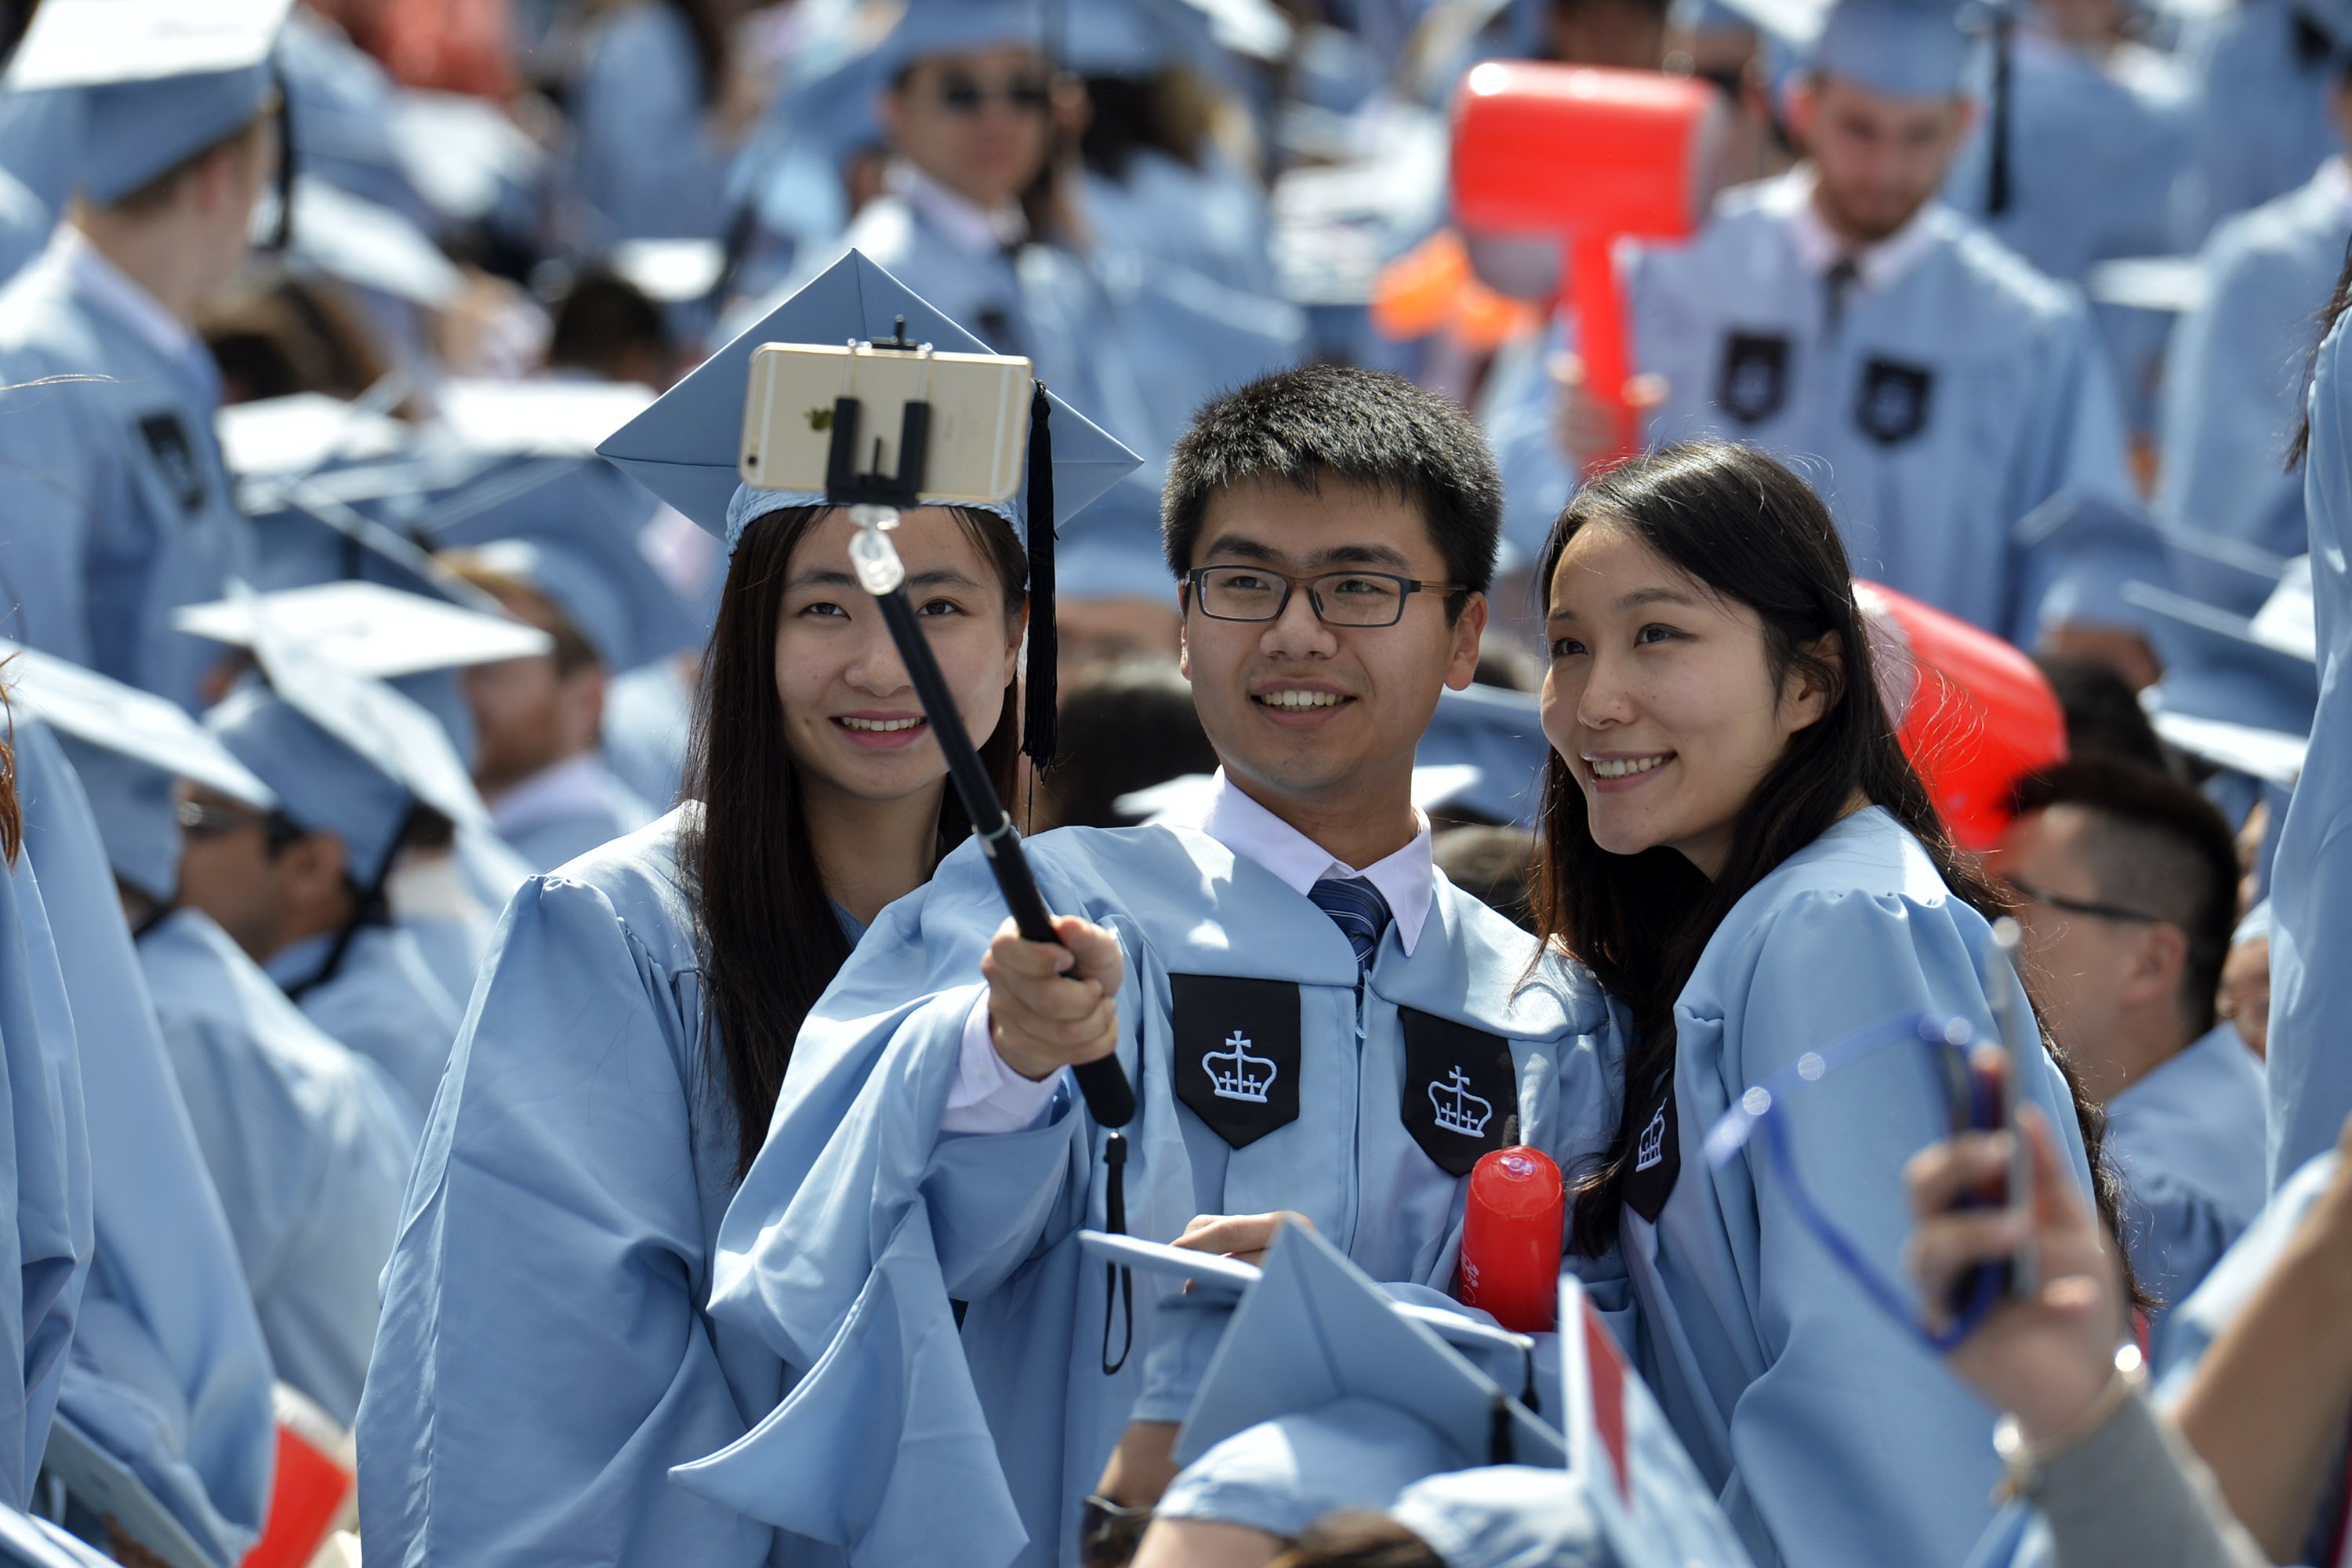 Chinese graduates of Columbia University at the 2015 commencement ceremony in New York City. Photo: Xinhua